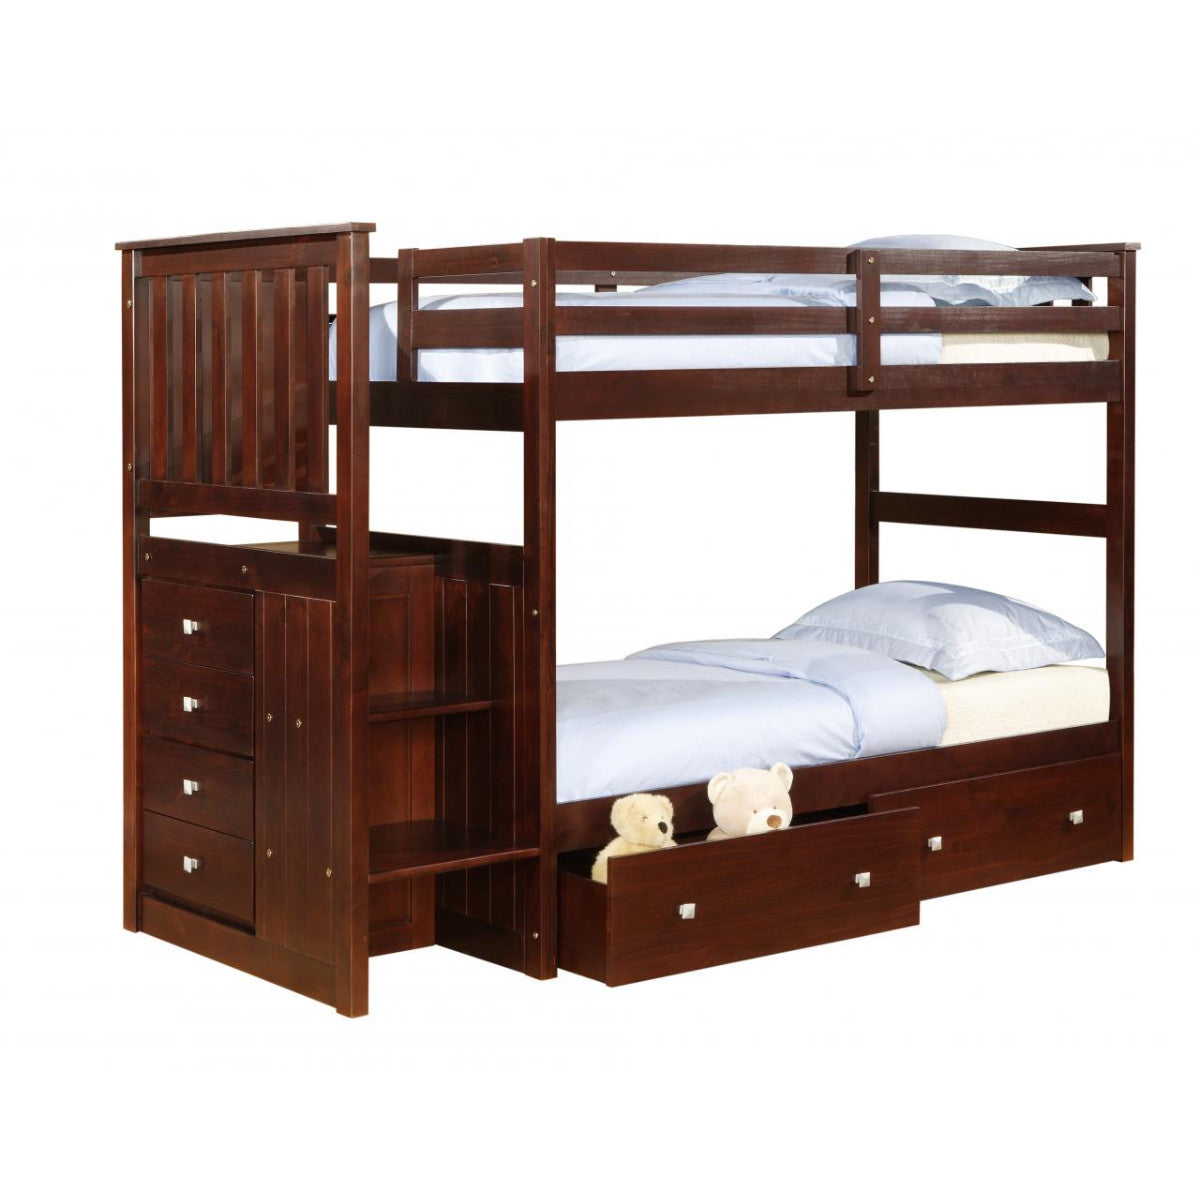 TWIN/FULL MISSION STAIRWAY BUNK BED WITH EXT KIT WITH DUAL UNDERBED DRAWERS CAPPUCCINO FINISH